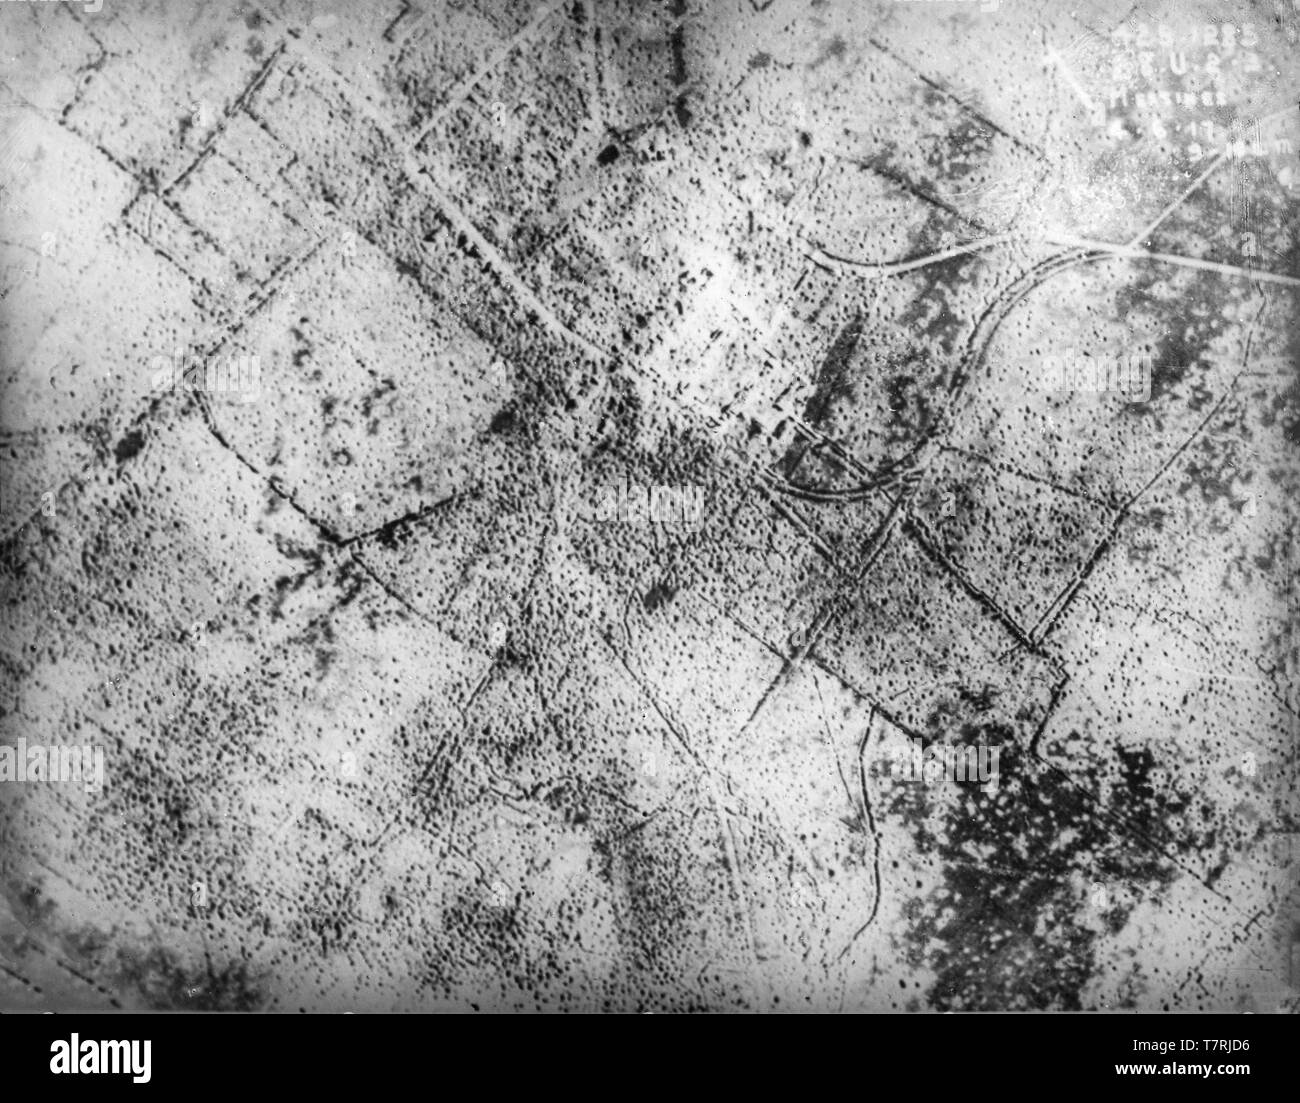 Contemporary black and white British photograph taken from an aeroplane in June 1917 over the Belgian town of Messiness, near Flanders. Photograph clearly shows the vast devastation caused by the huge shelling and bombing of what became known as The Battle Of Messiness. Aerial bombing World war One. Stock Photo